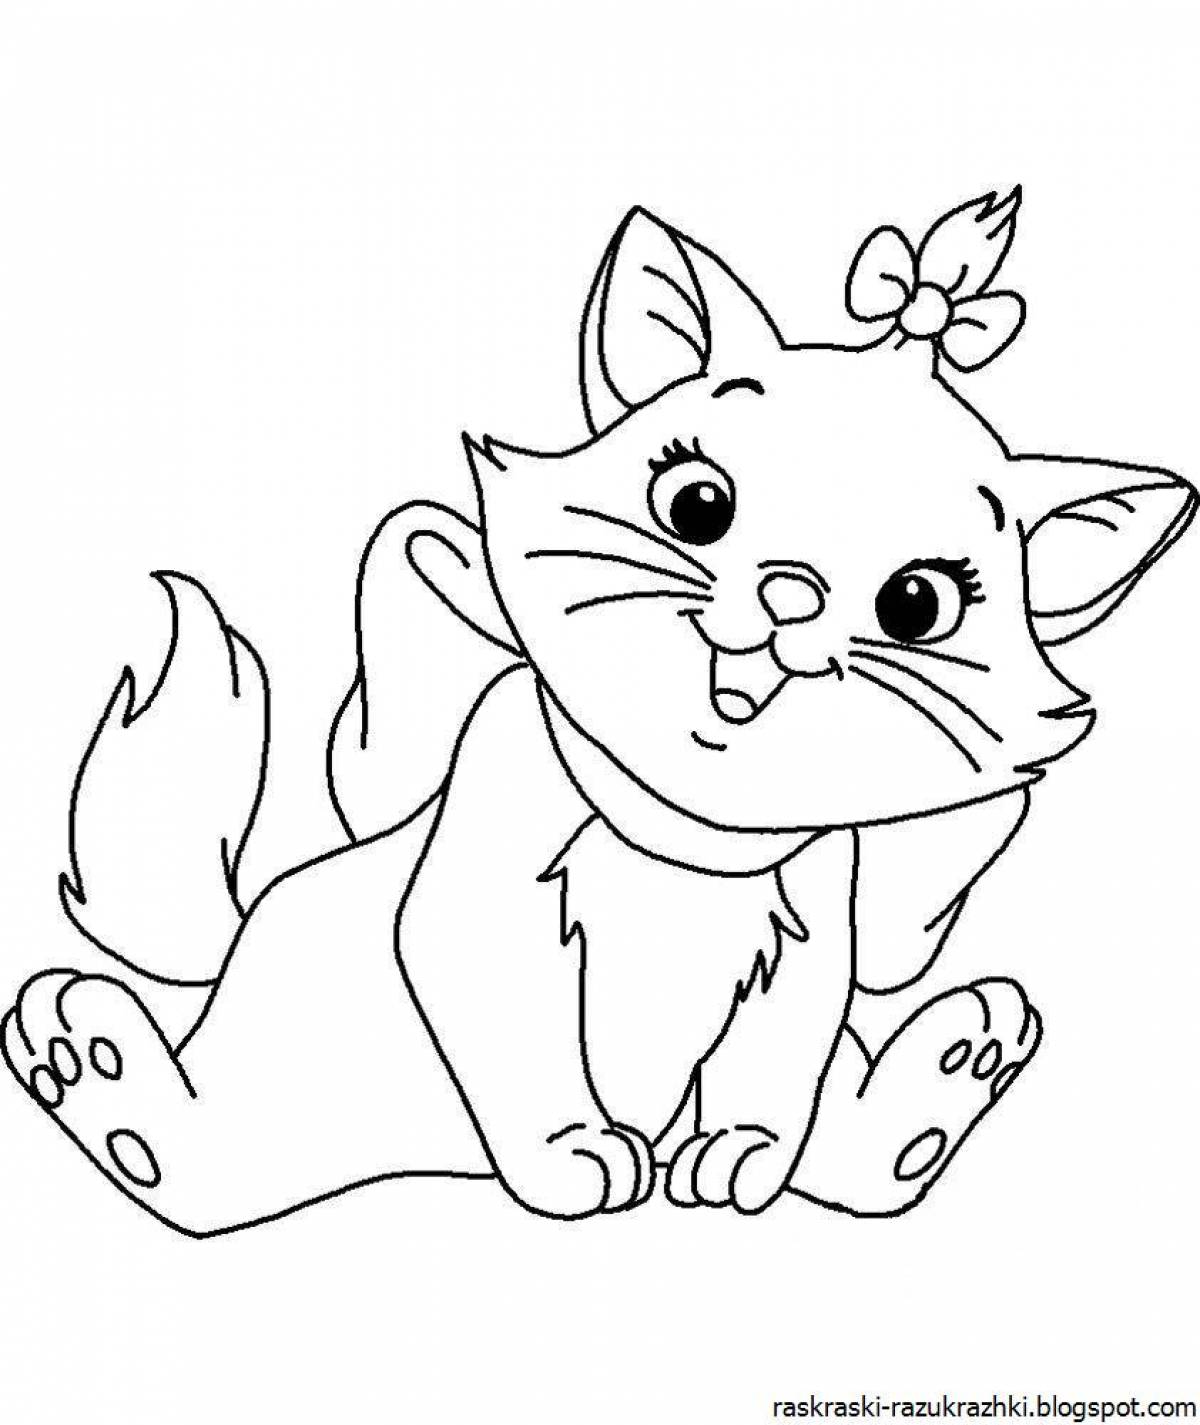 Adorable coloring book for kitten girls